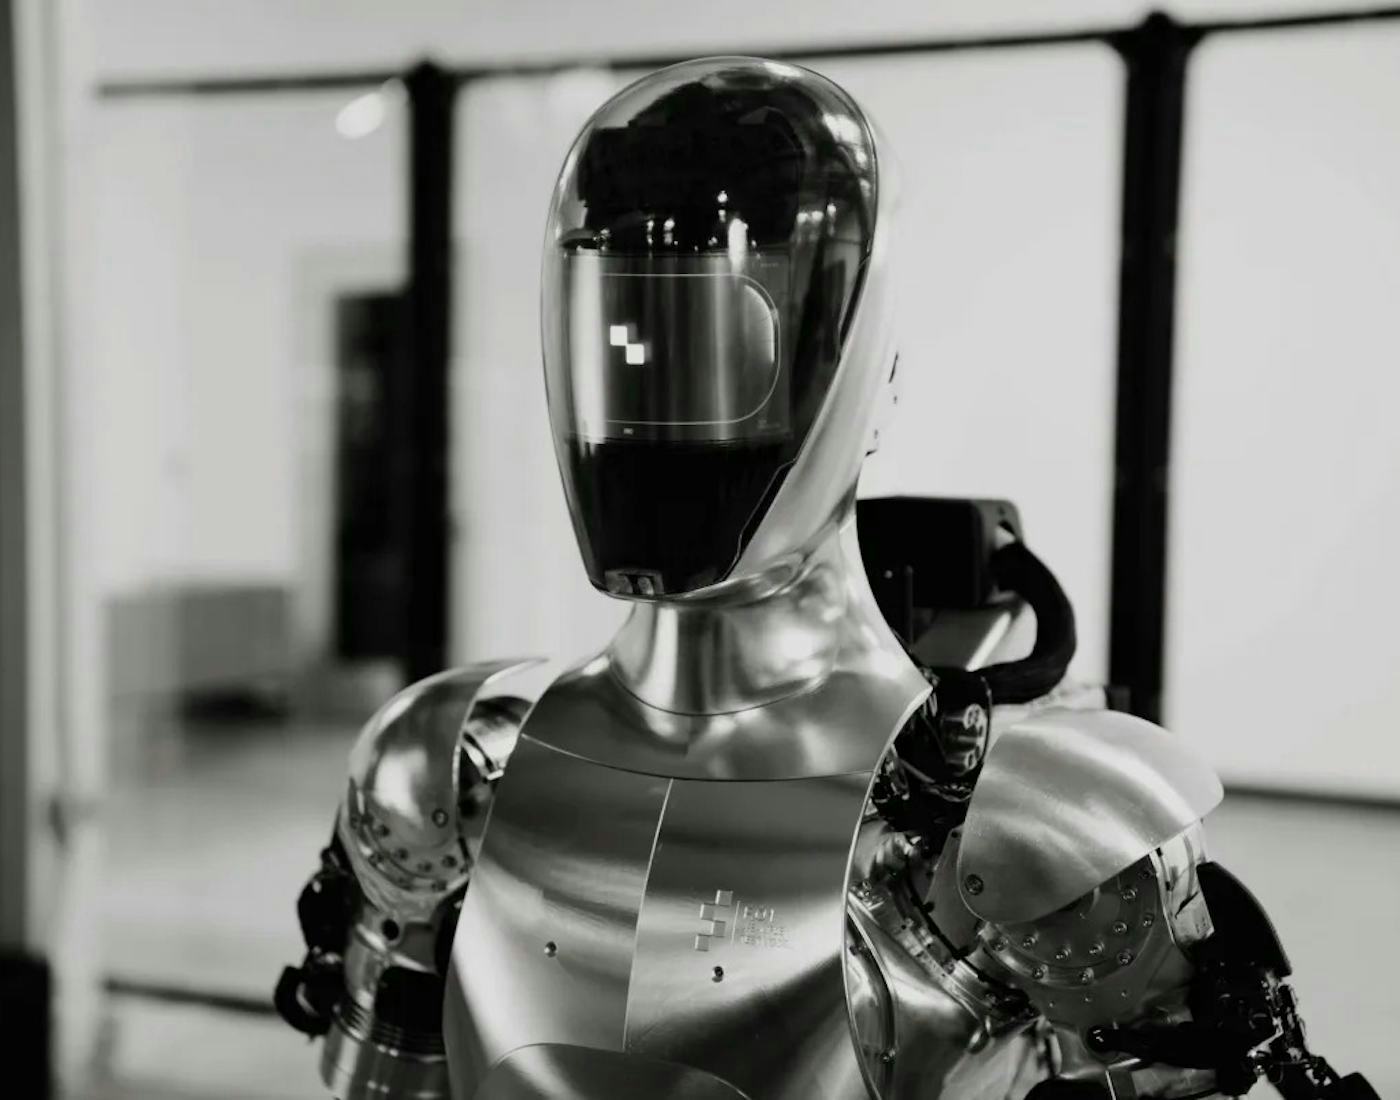 A humanoid robot with a reflective head and torso made of sleek, metallic material, standing in an indoor setting.